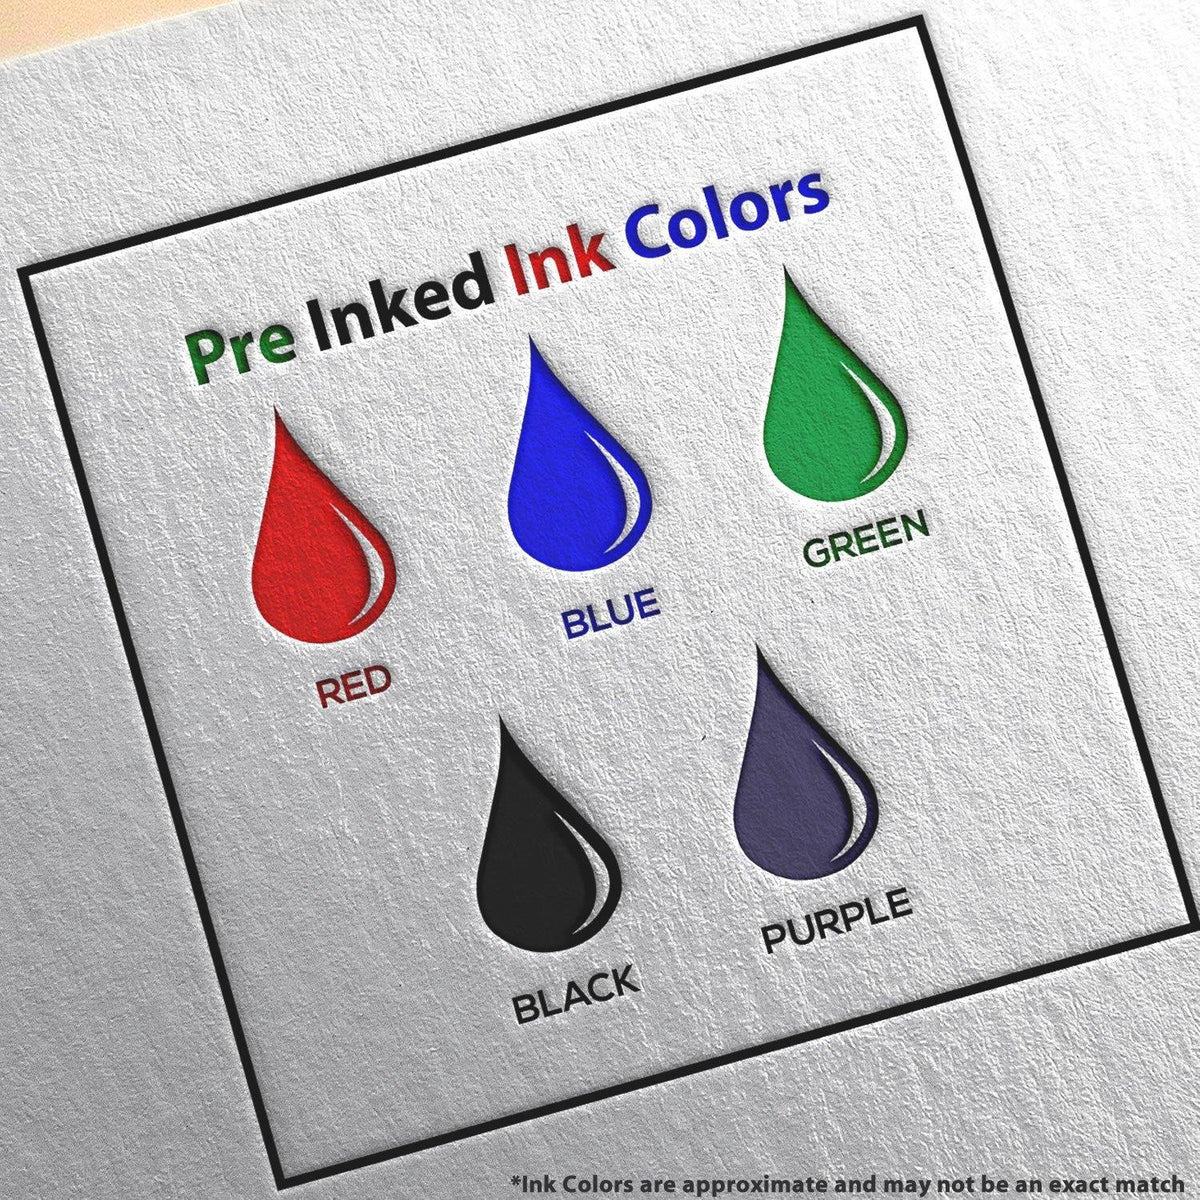 Slim Pre-Inked Times First Class Mail Stamp Ink Color Options